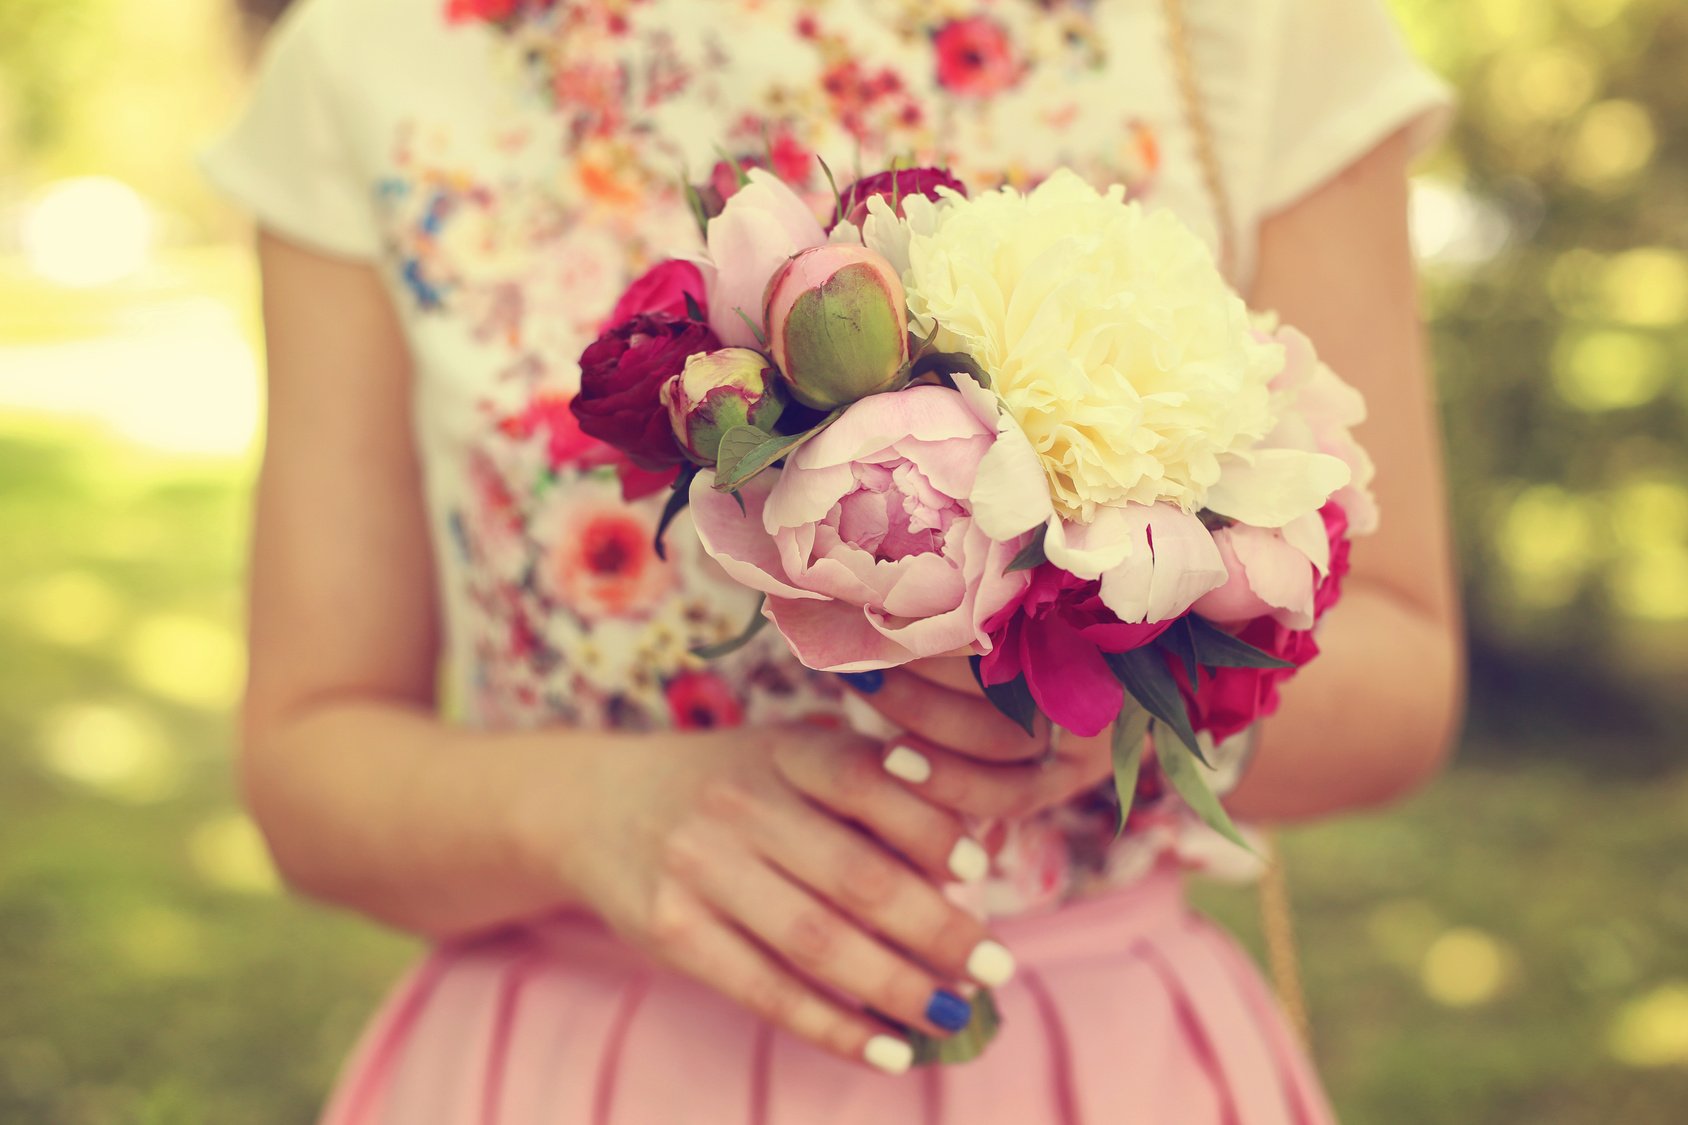 Hands of a woman holding beautiful peonies bouquet